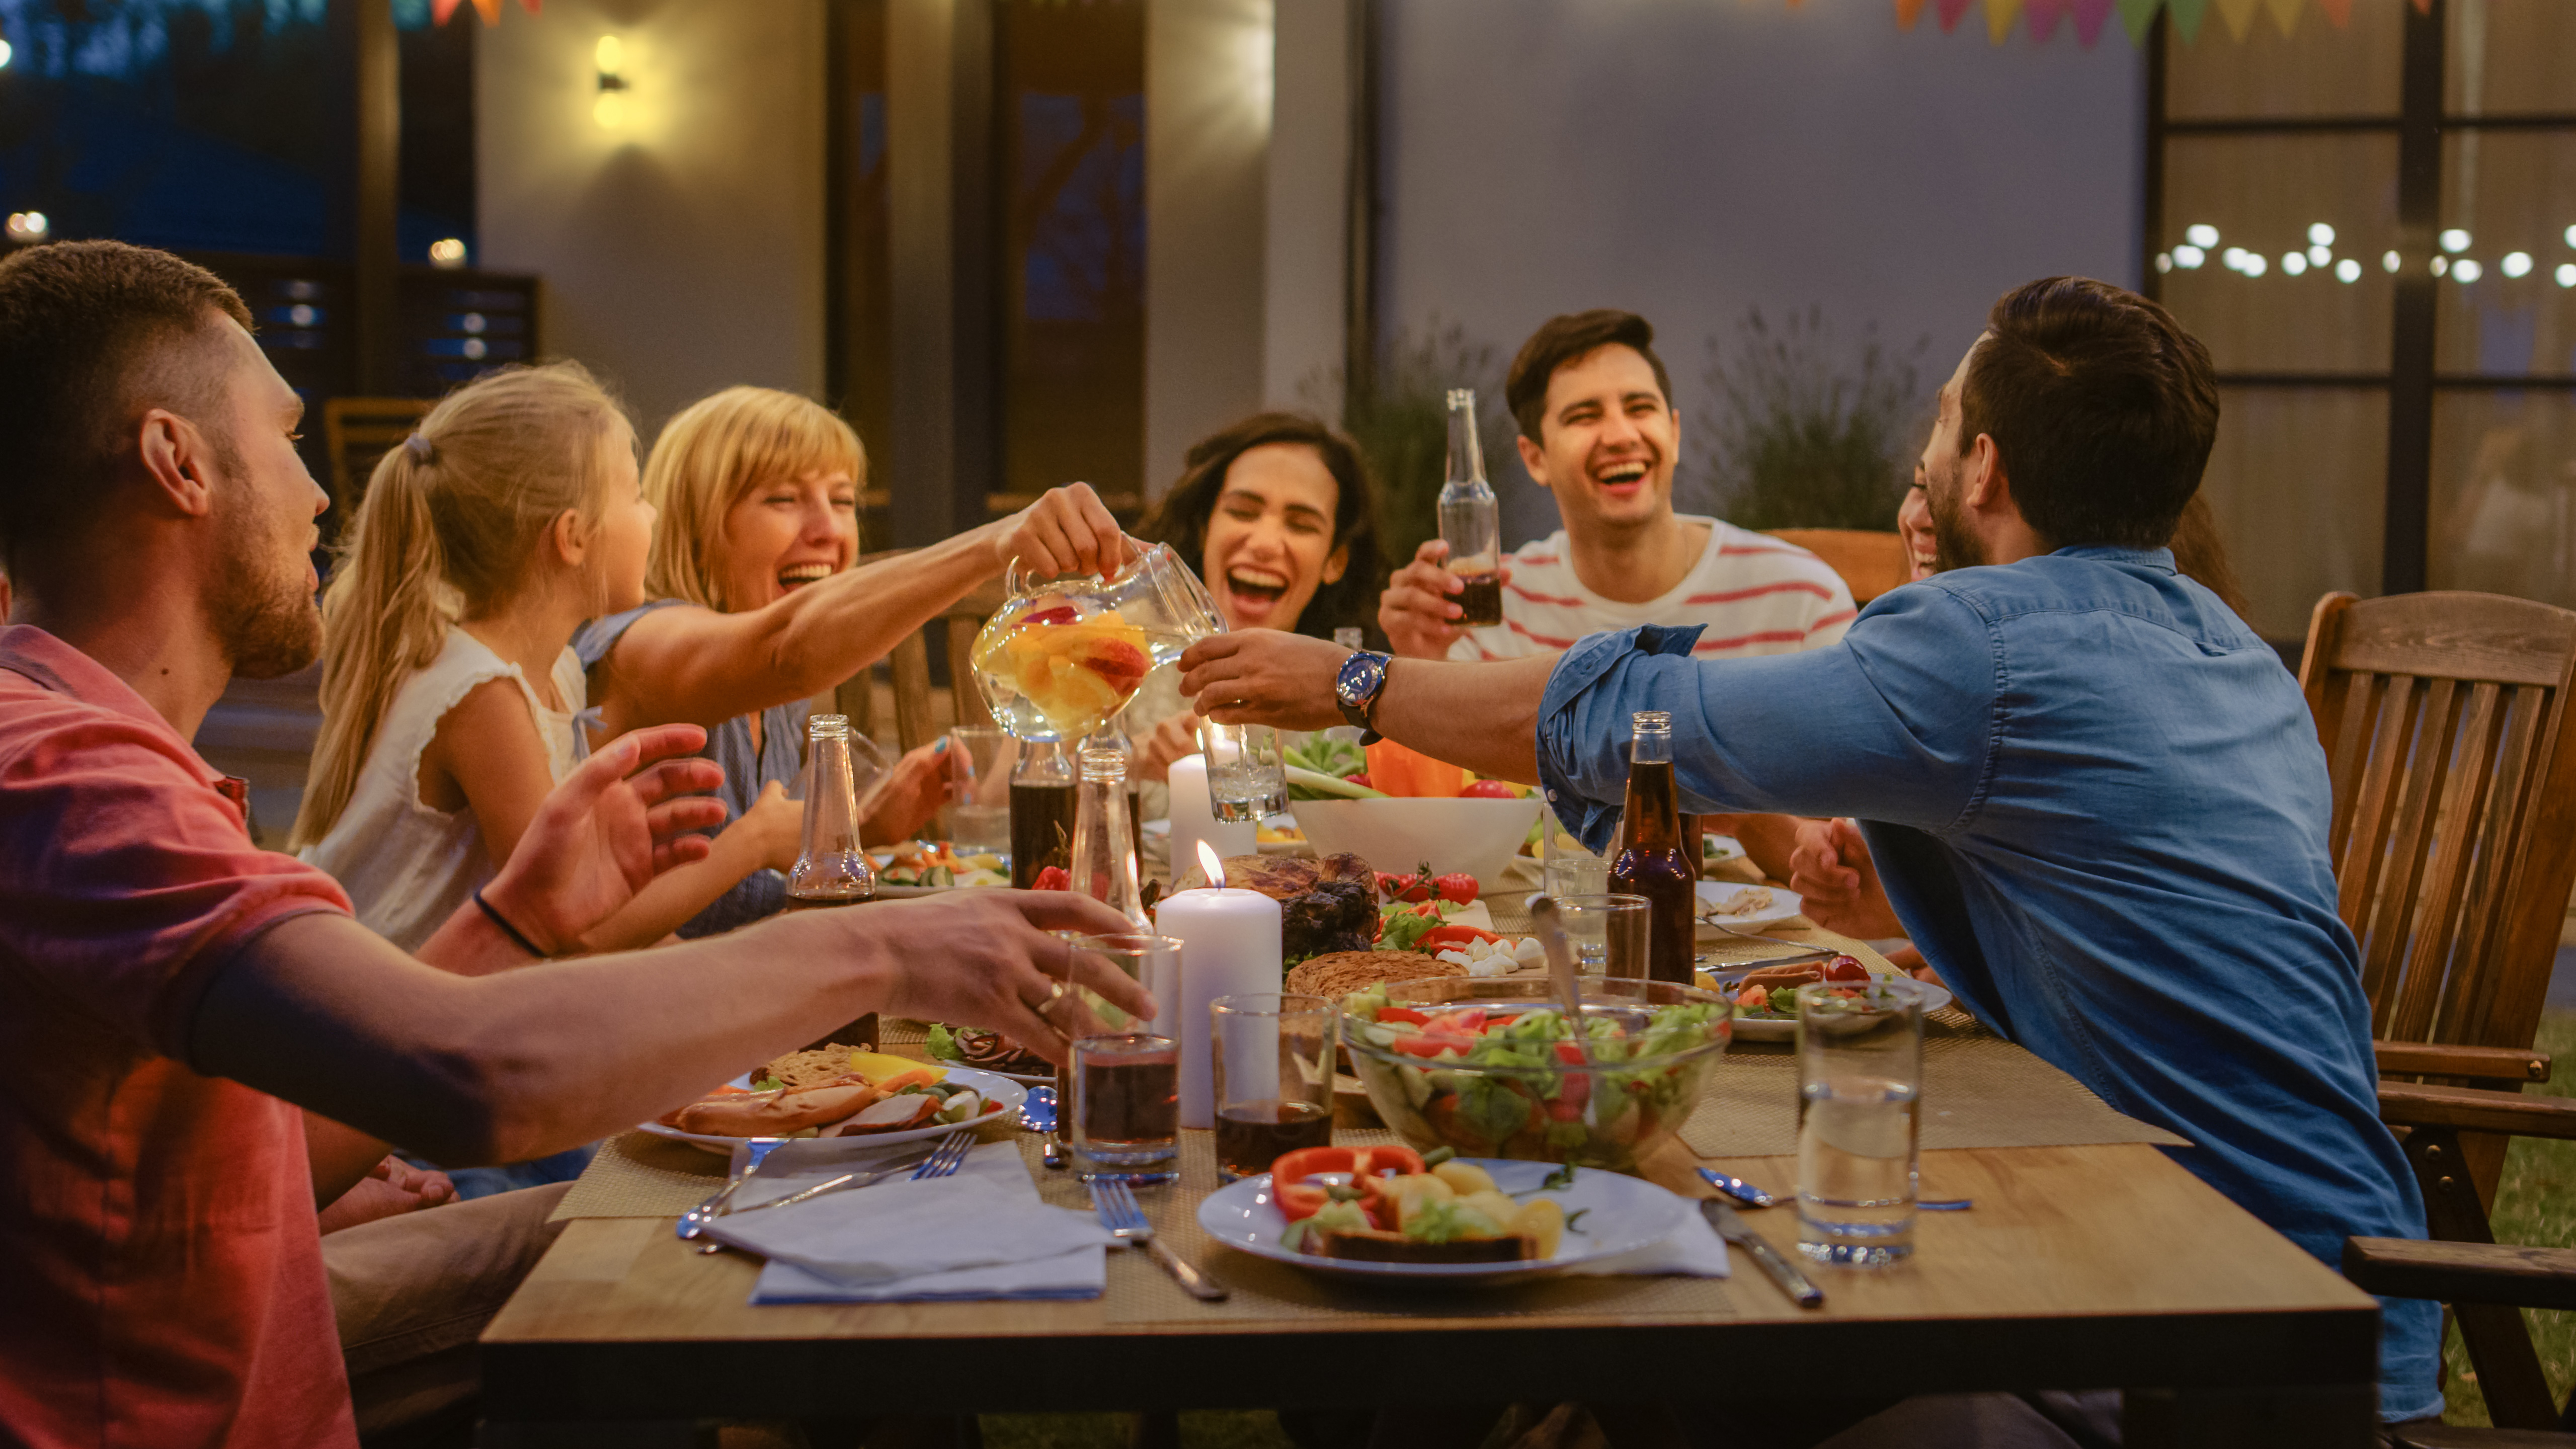 shutterstock image of friends laughing and eating